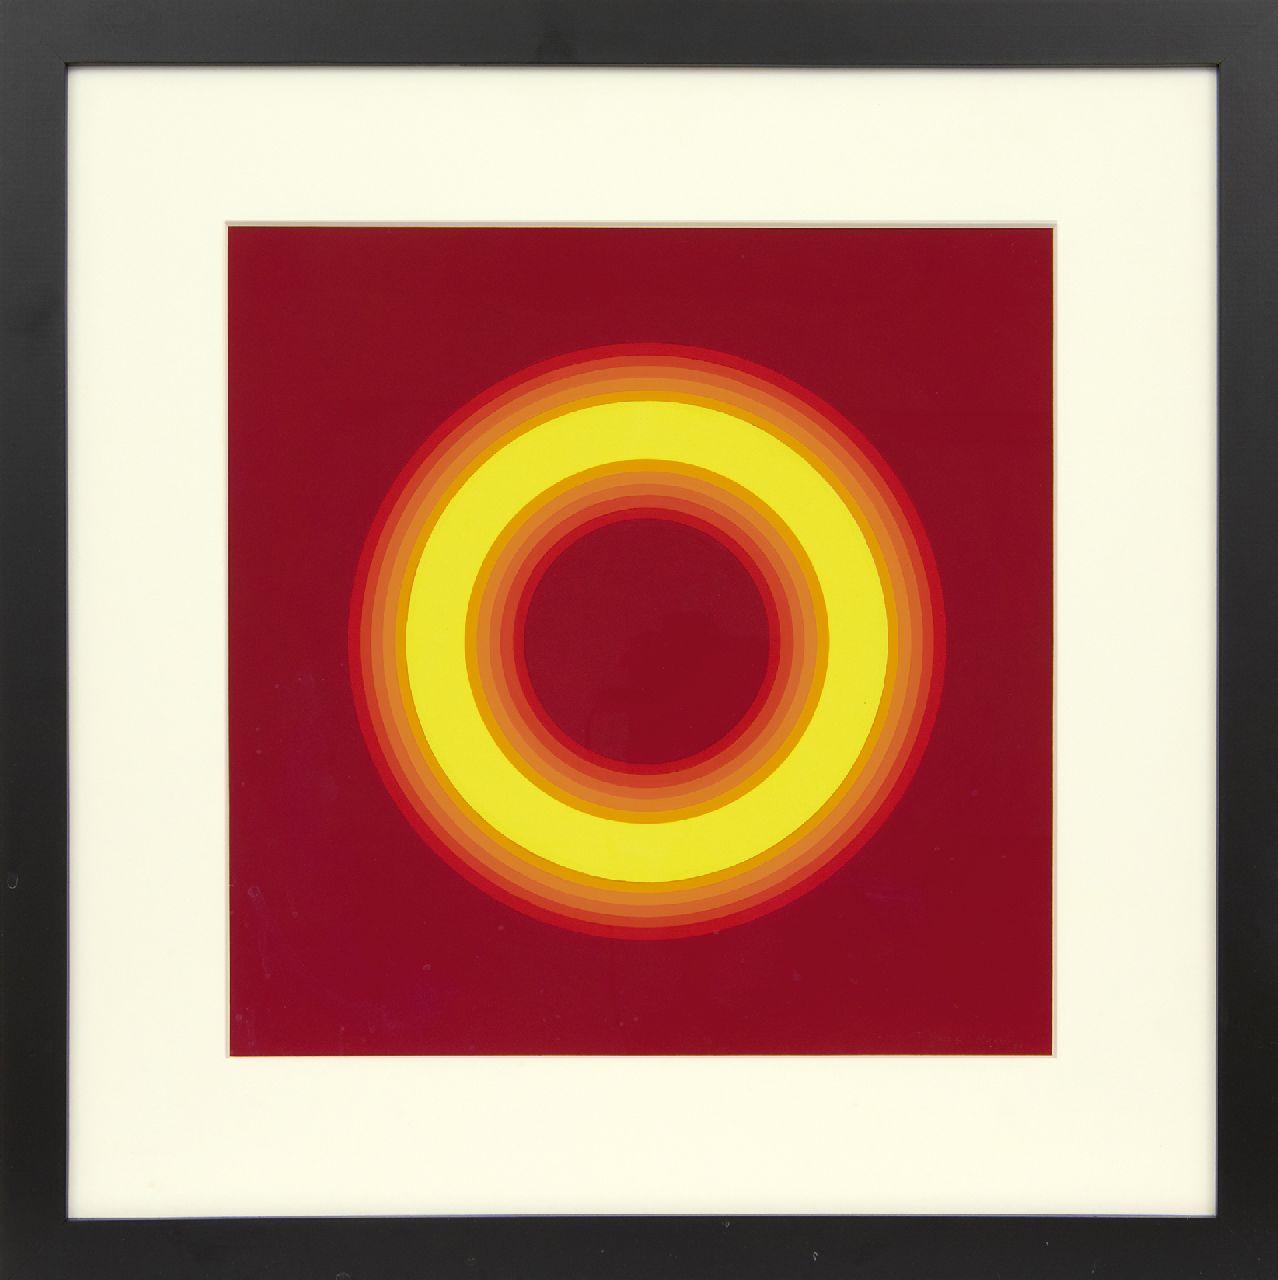 Garcia Rossi H.  | Horacio Garcia Rossi, Untitled, acrylic on board 35.0 x 35.0 cm, signed l.r. and dated '73